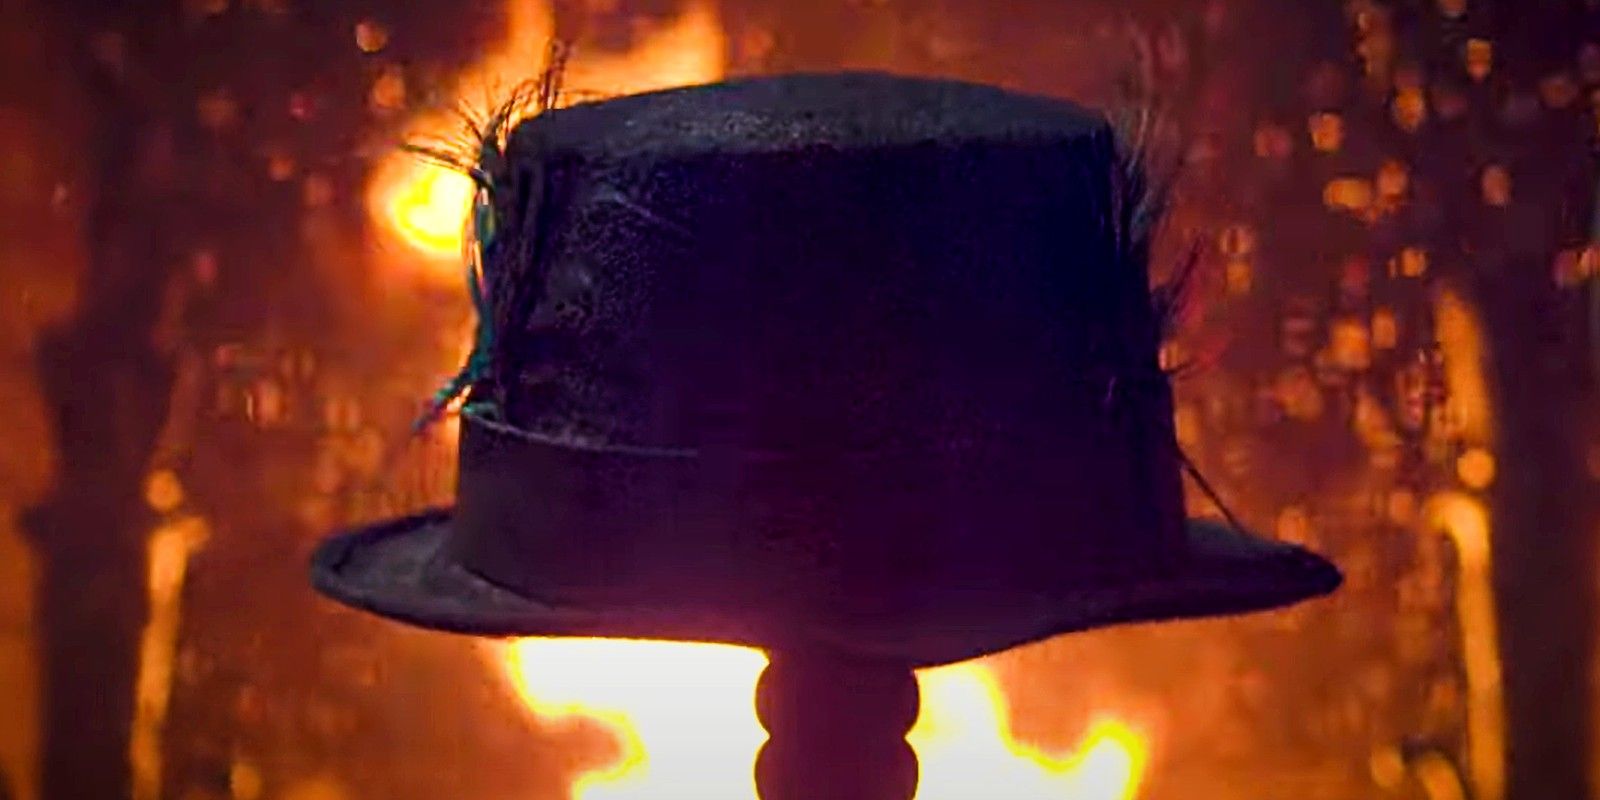 a menacing, scary black hat against a fiery background in the Hanky Panky trailer